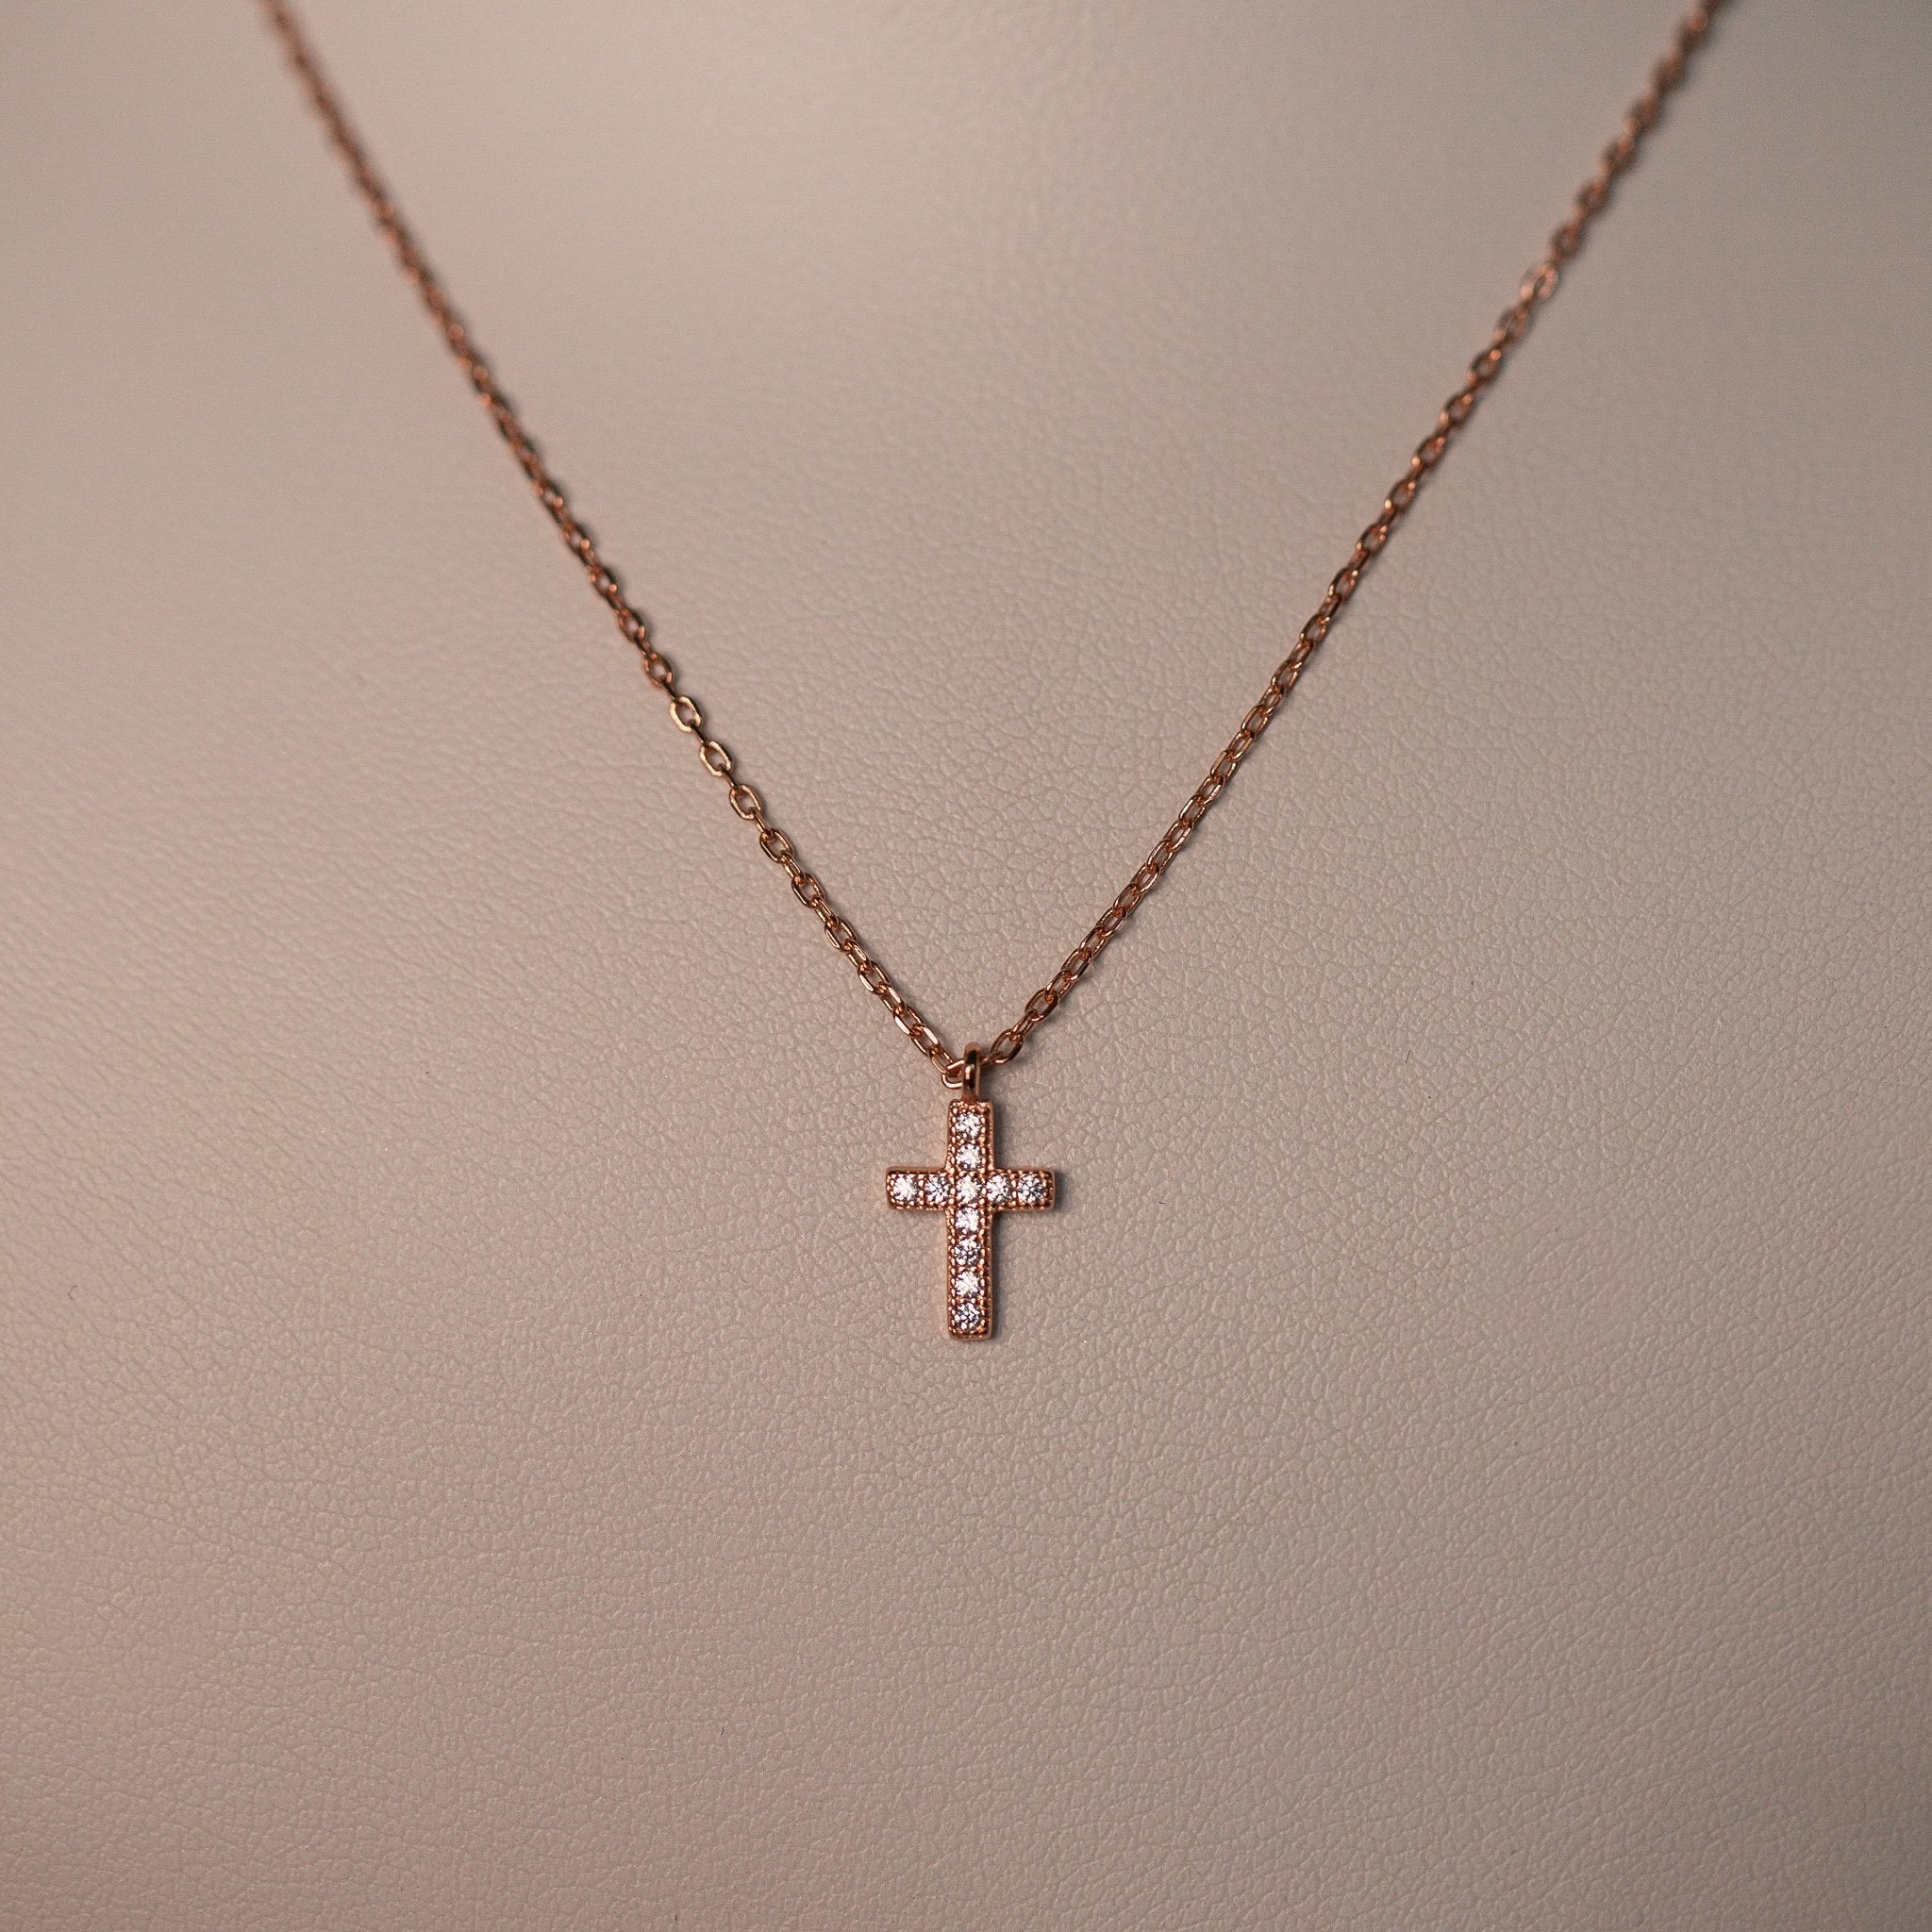 Dainty Cross Necklace in Gold - Miller St. Boutique